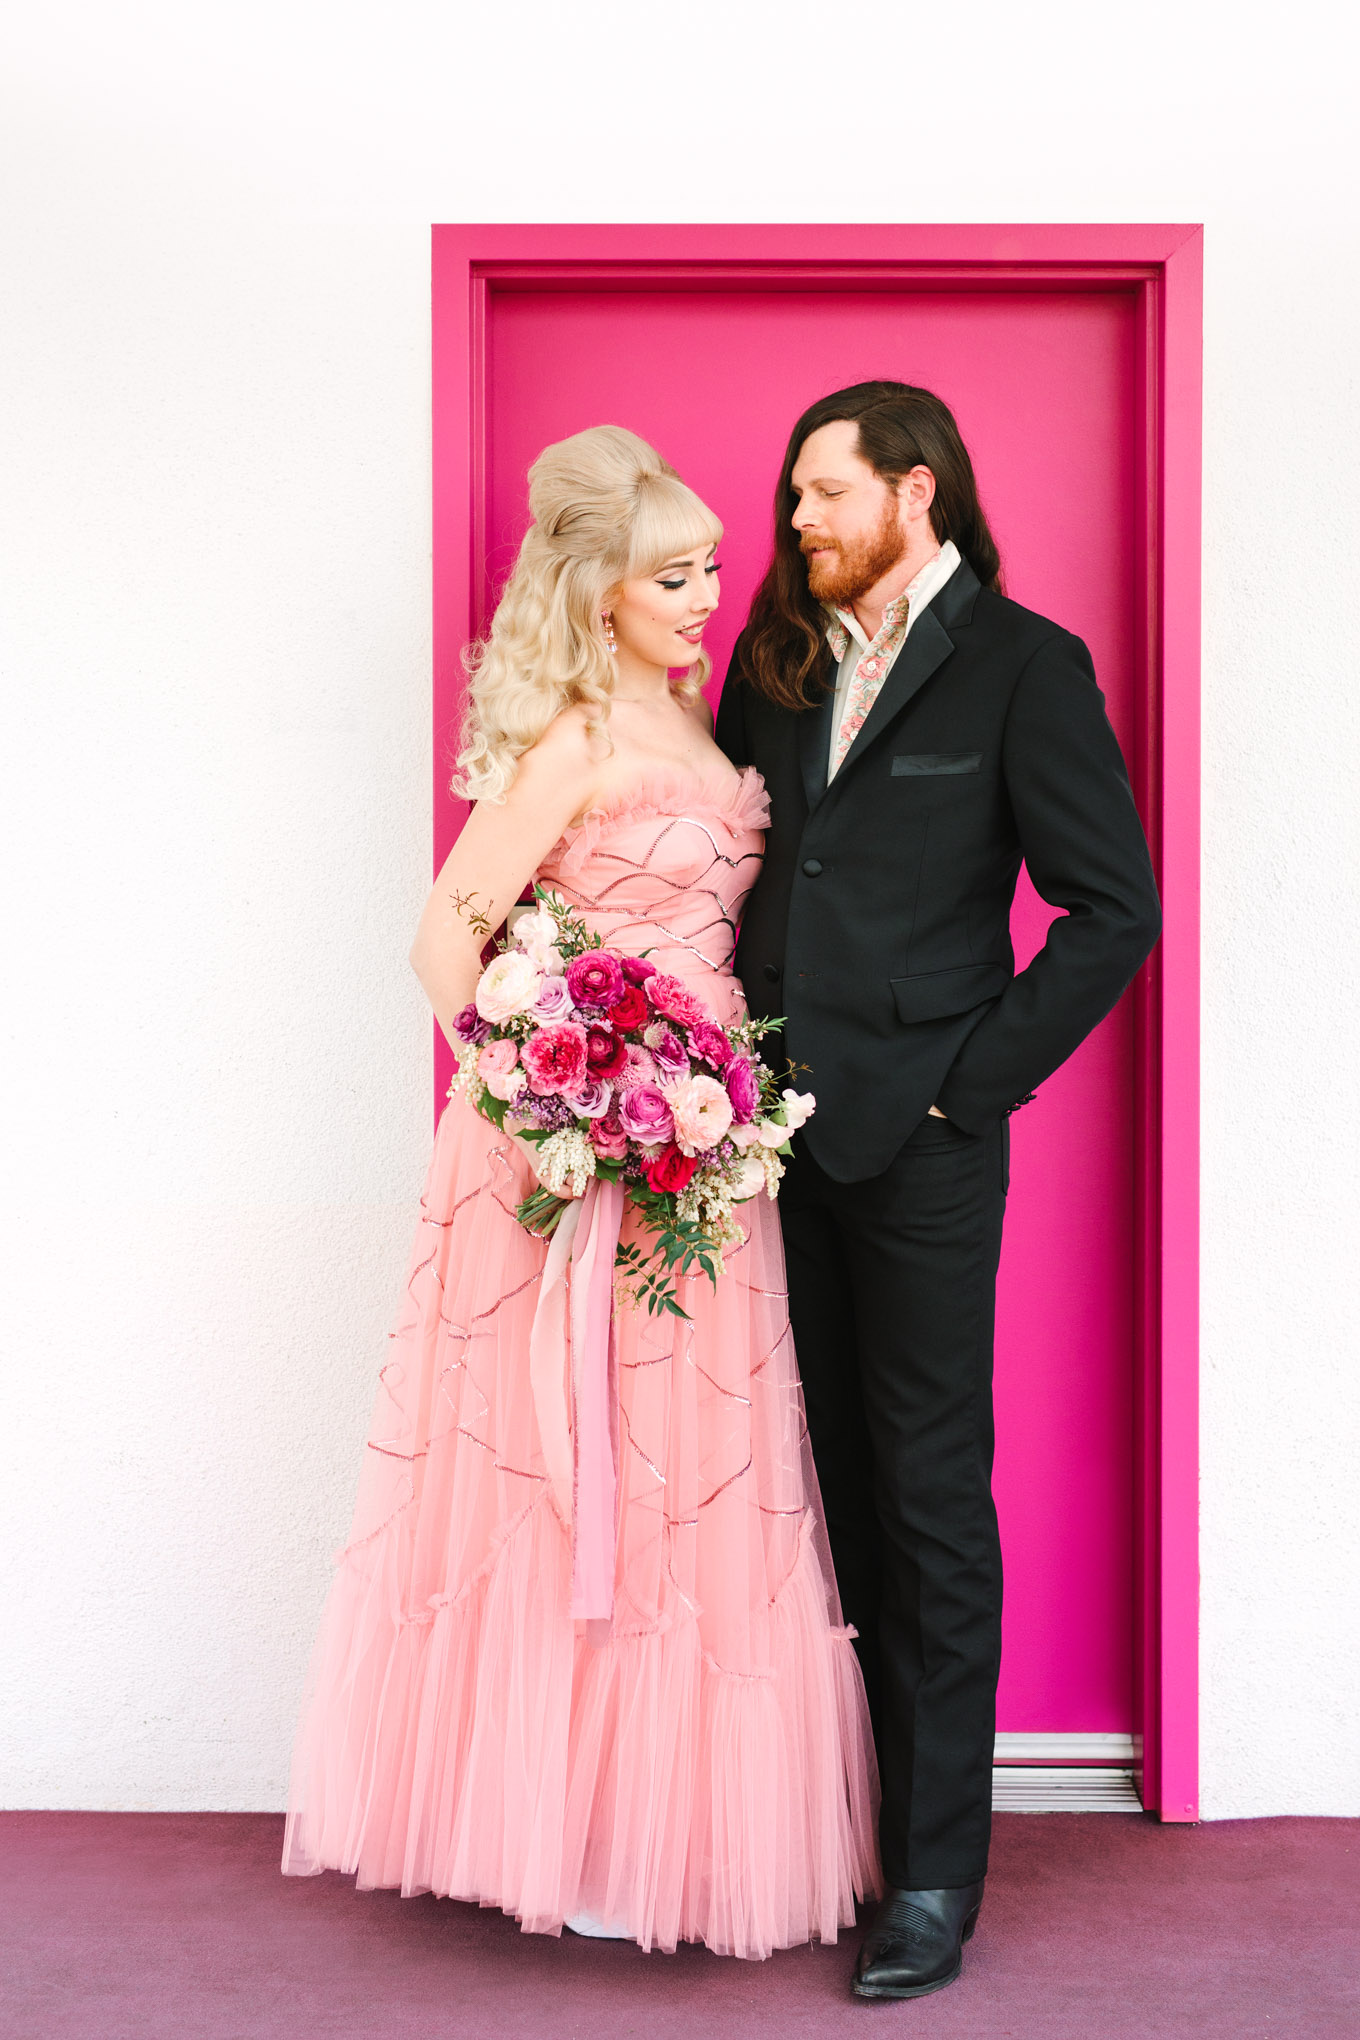 Retro couple with colorful Saguaro Hotel door. Modern vintage-inspired Palm Springs engagement session with a 1960s pink Cadillac, retro clothing, and flowers by Shindig Chic. | Colorful and elevated wedding inspiration for fun-loving couples in Southern California | #engagementsession #PalmSpringsengagement #vintageweddingdress #floralcar #pinkcar   Source: Mary Costa Photography | Los Angeles 